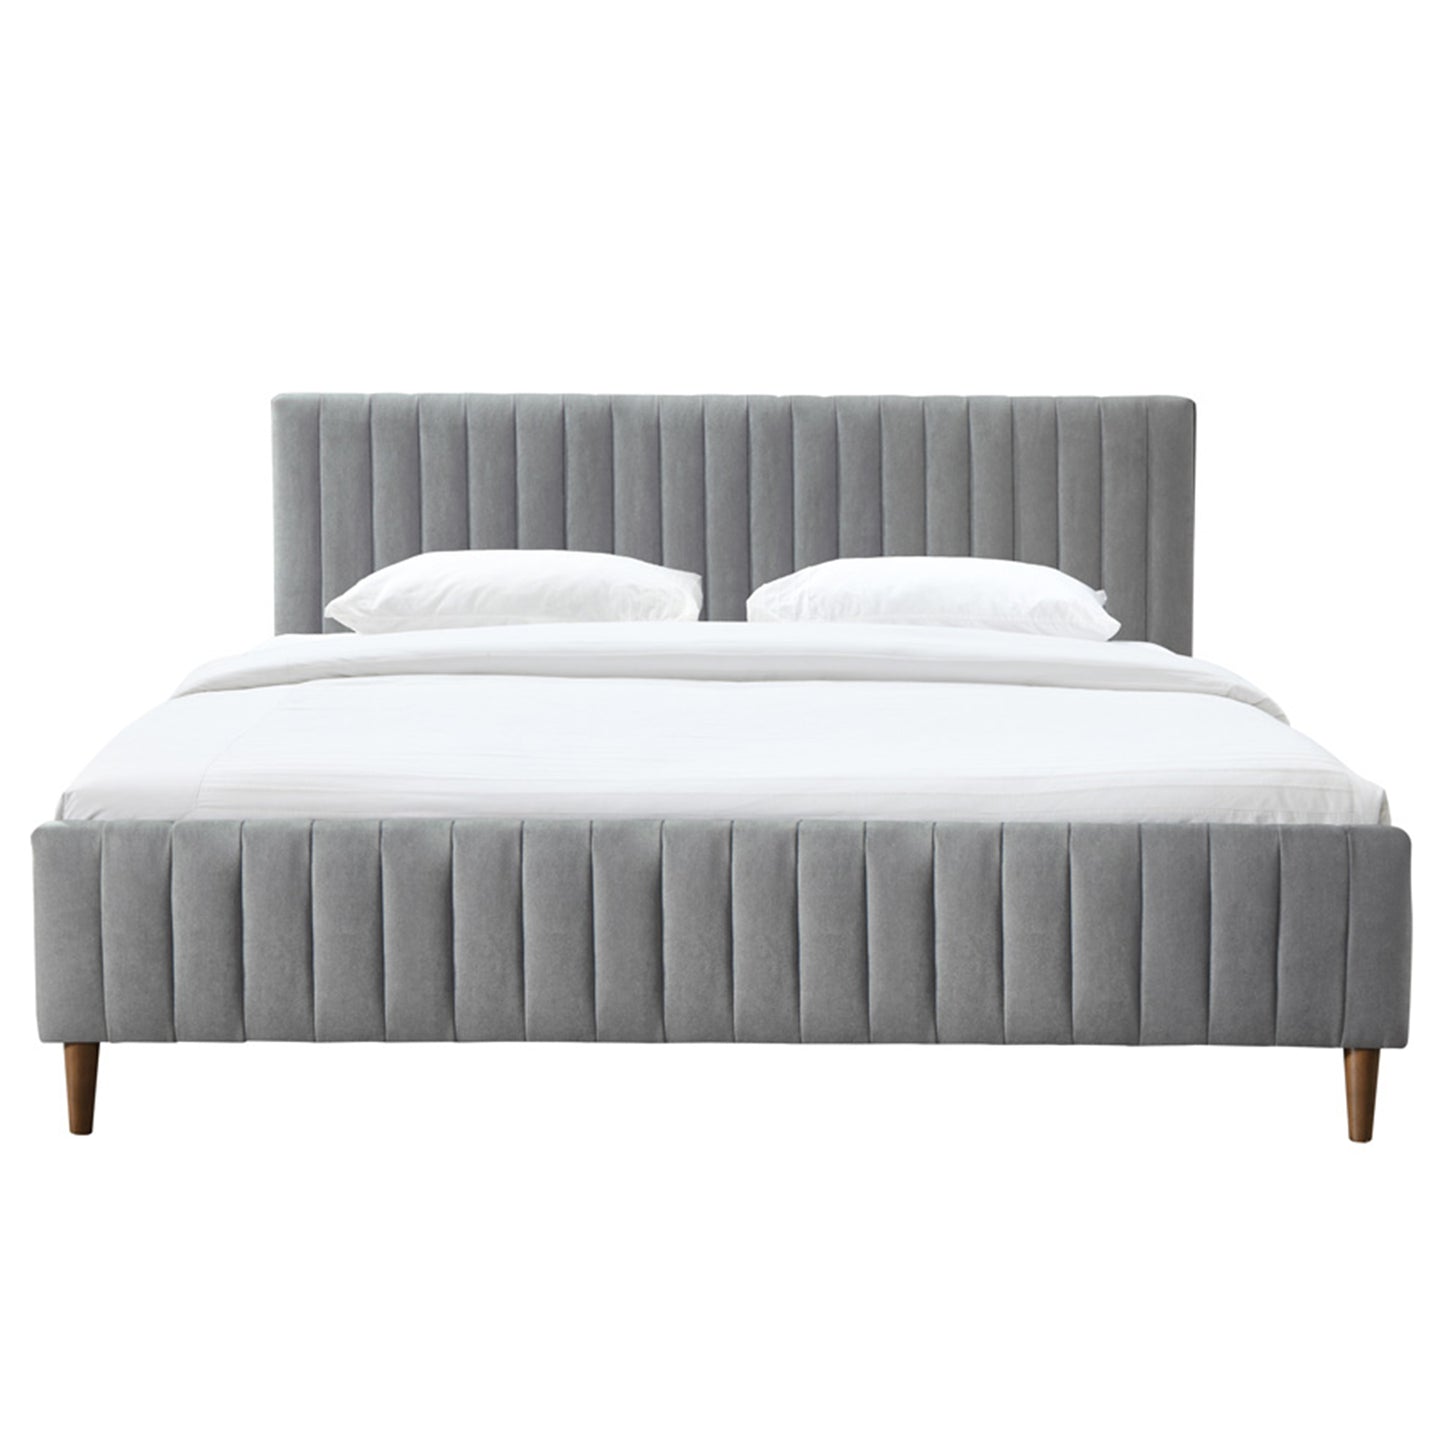 KING SIZE- (HANNAH LIGHT GREY) - FABRIC - BED FRAME- WITH SLATS